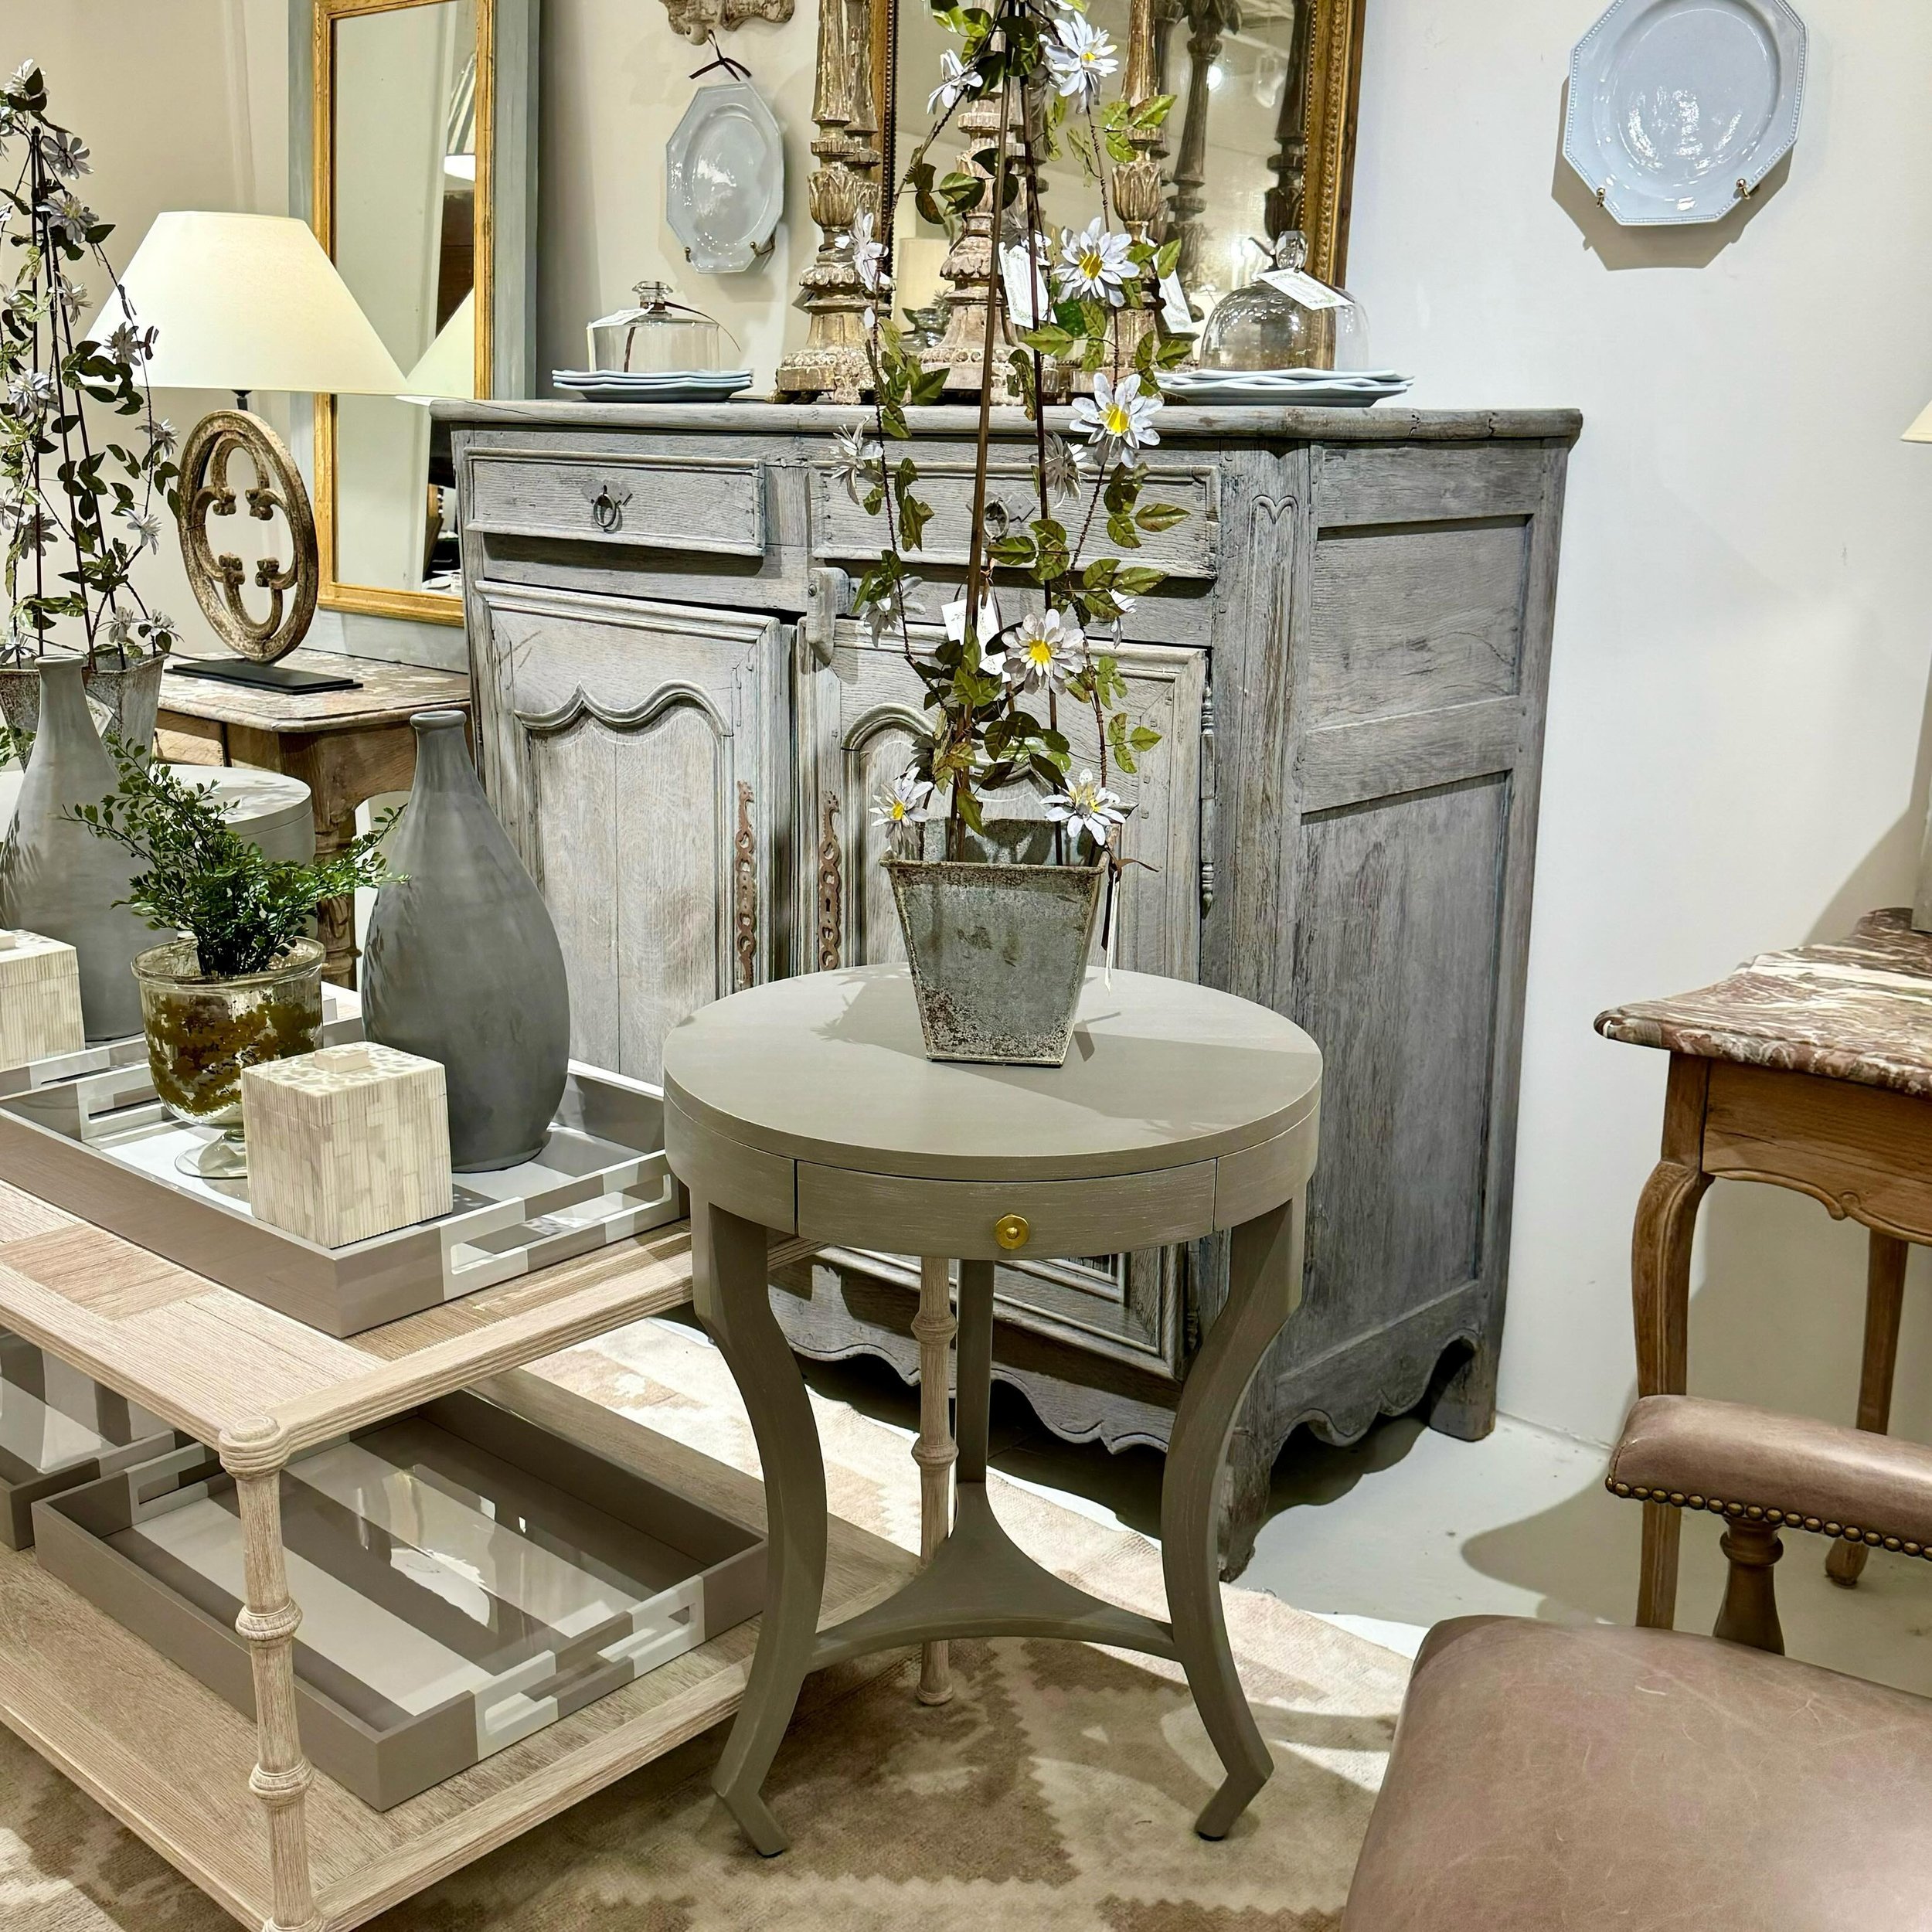 Back in stock&mdash;one of our favorite little side tables in the prettiest French Grey color. #heritageclt #curateddecor #europeanantiques #italianantiques #englishantiques #frenchantiques #antiquedecor #antiquedealersofinstagram #antiquepatina #pat